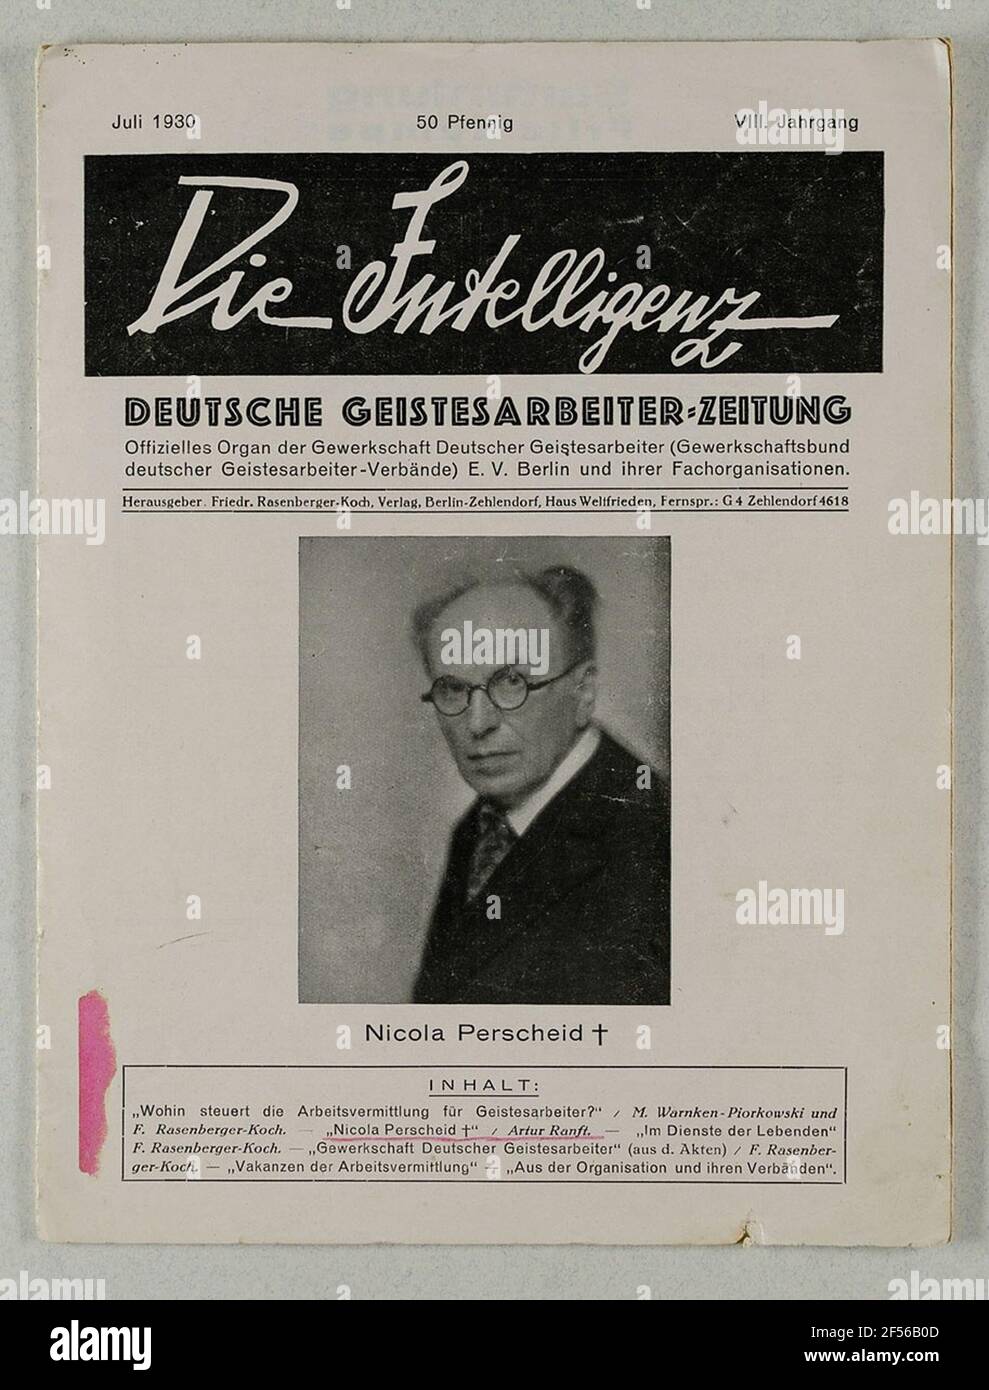 The intelligence - German spirit worker newspaper: Nicola Perscheid died. Issue of the magazine "The Intelligence. German Spirit Worker Newspaper" (July 1930) with an obituary to the photographer Nicola Perscheid, who died on May 12, 1930, titled "Nicola Perscheid and his work" by Artur Ranft. Stock Photo